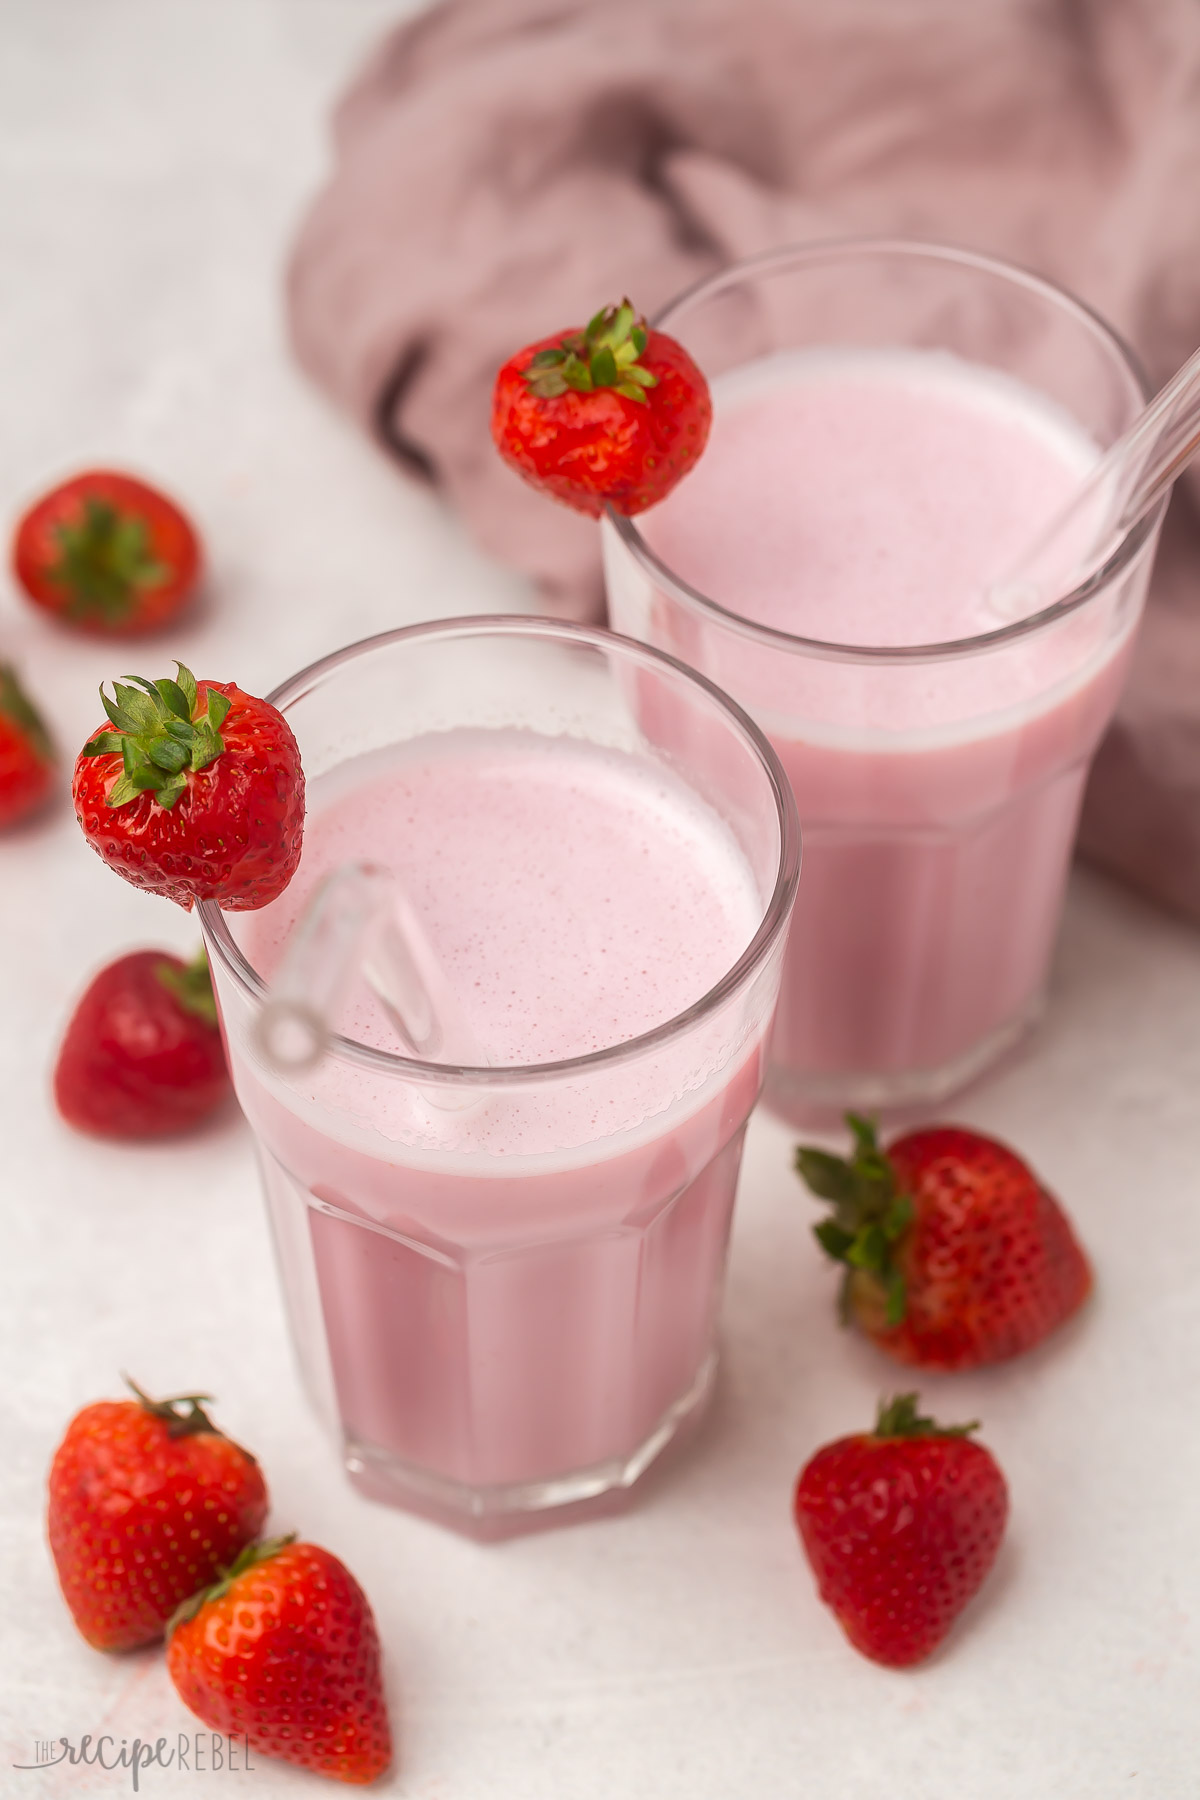 Two glass cups full of strawberry milk with strawberries surrounding them.